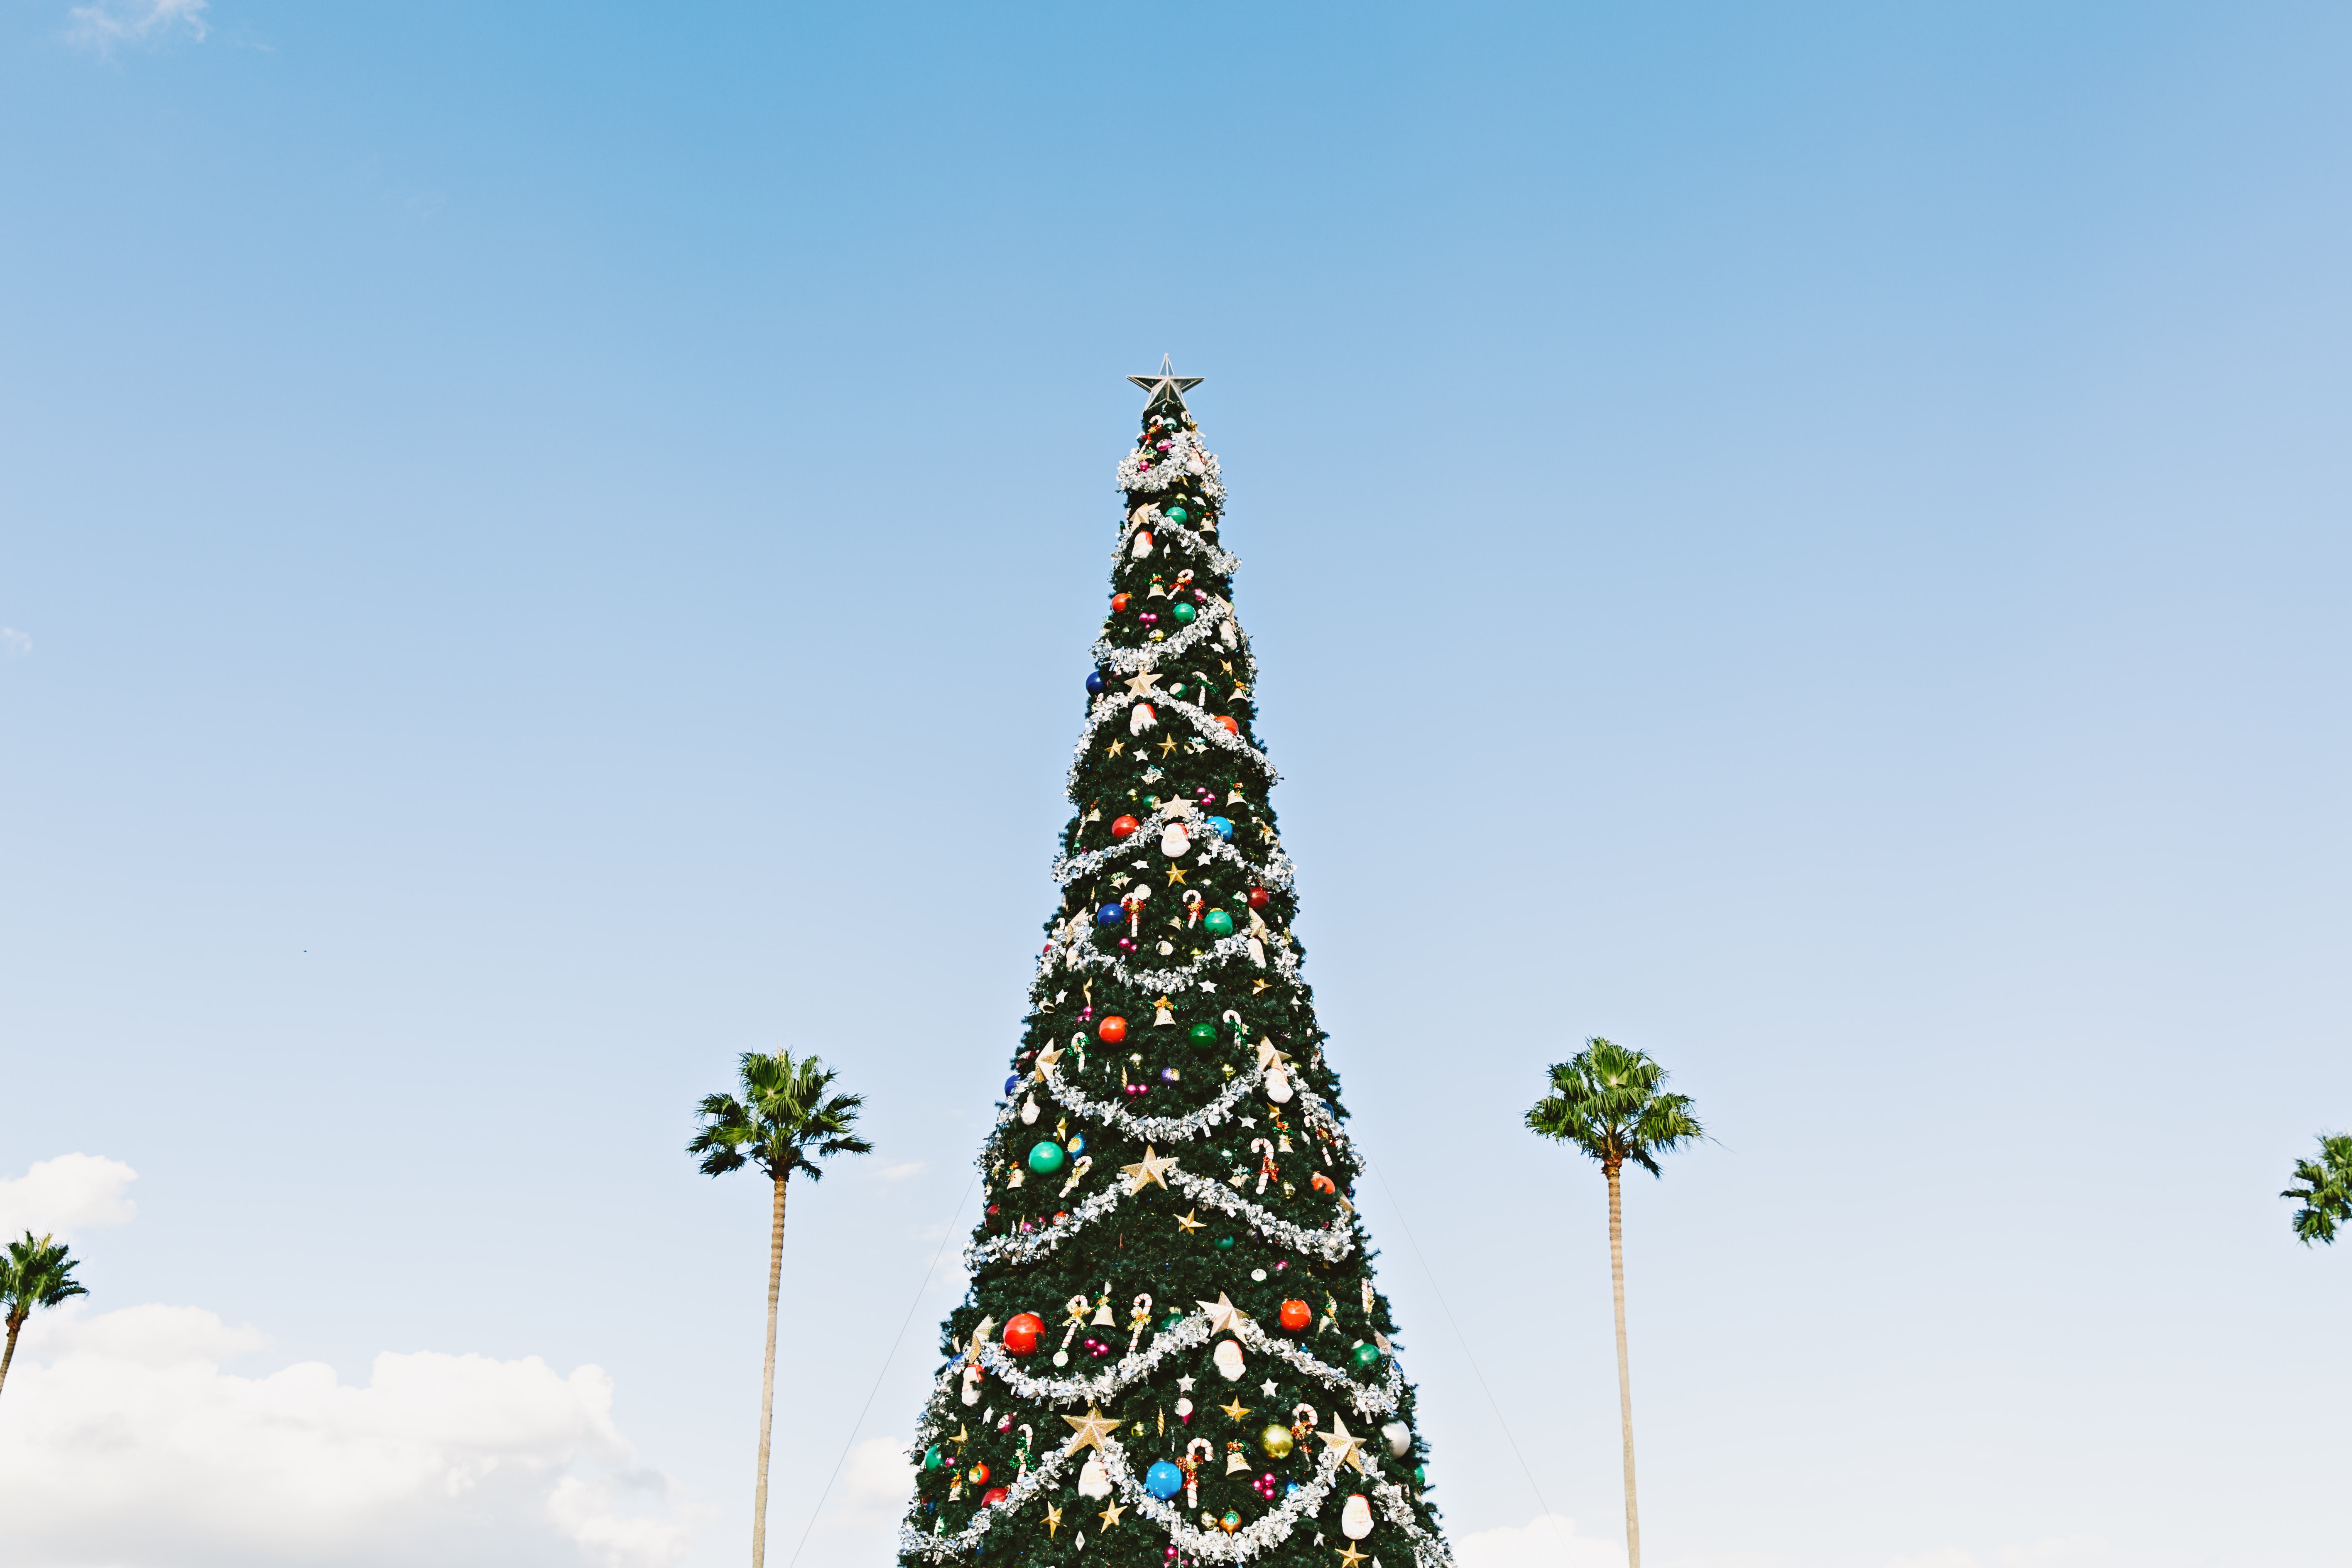 Tropical Christmas tree in front of blue sky and palm trees